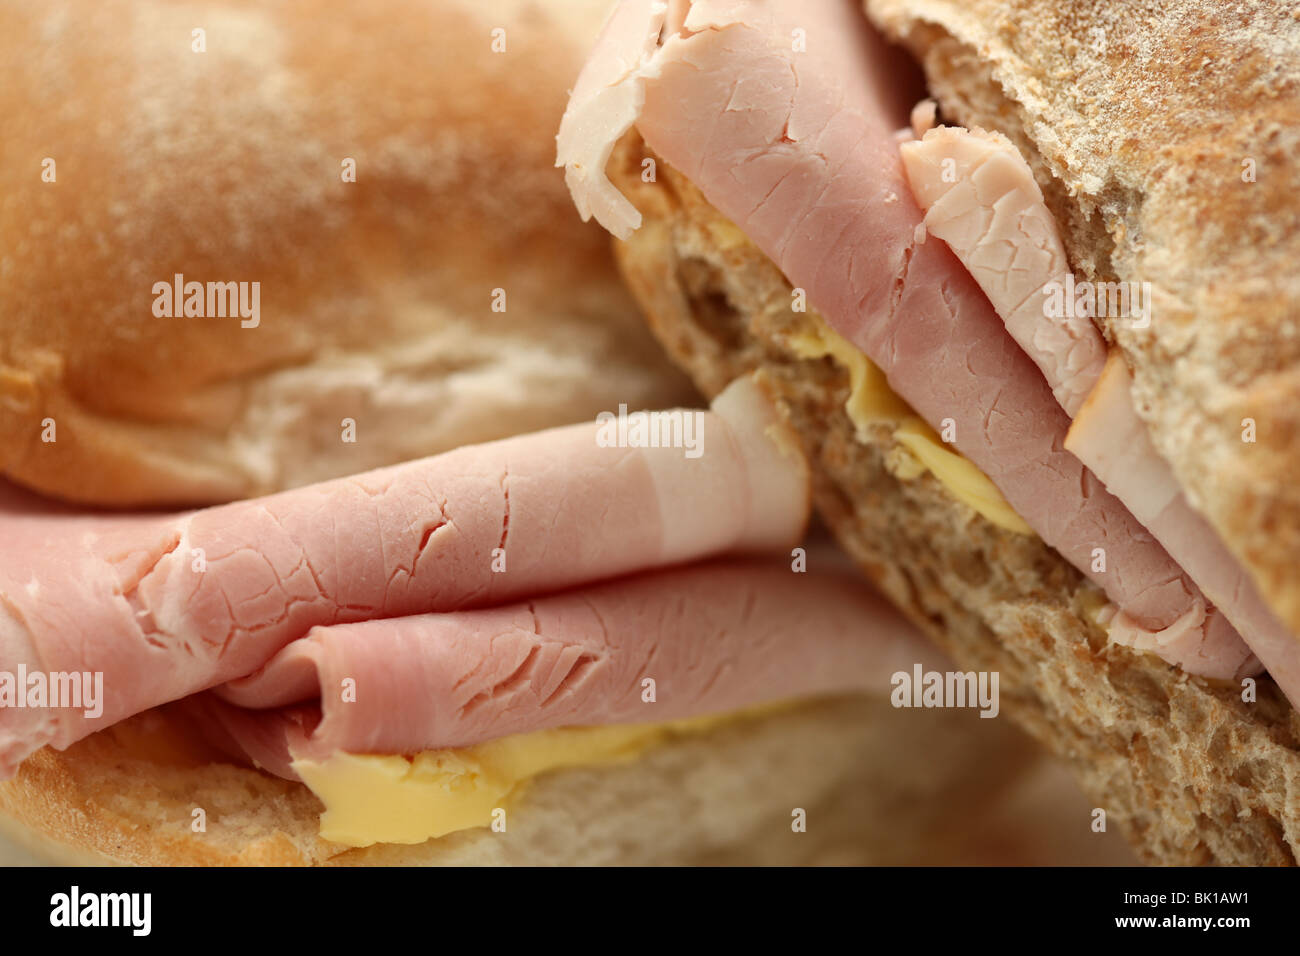 Fresh Healthy Cooked Ham Bread Roll With No People Stock Photo